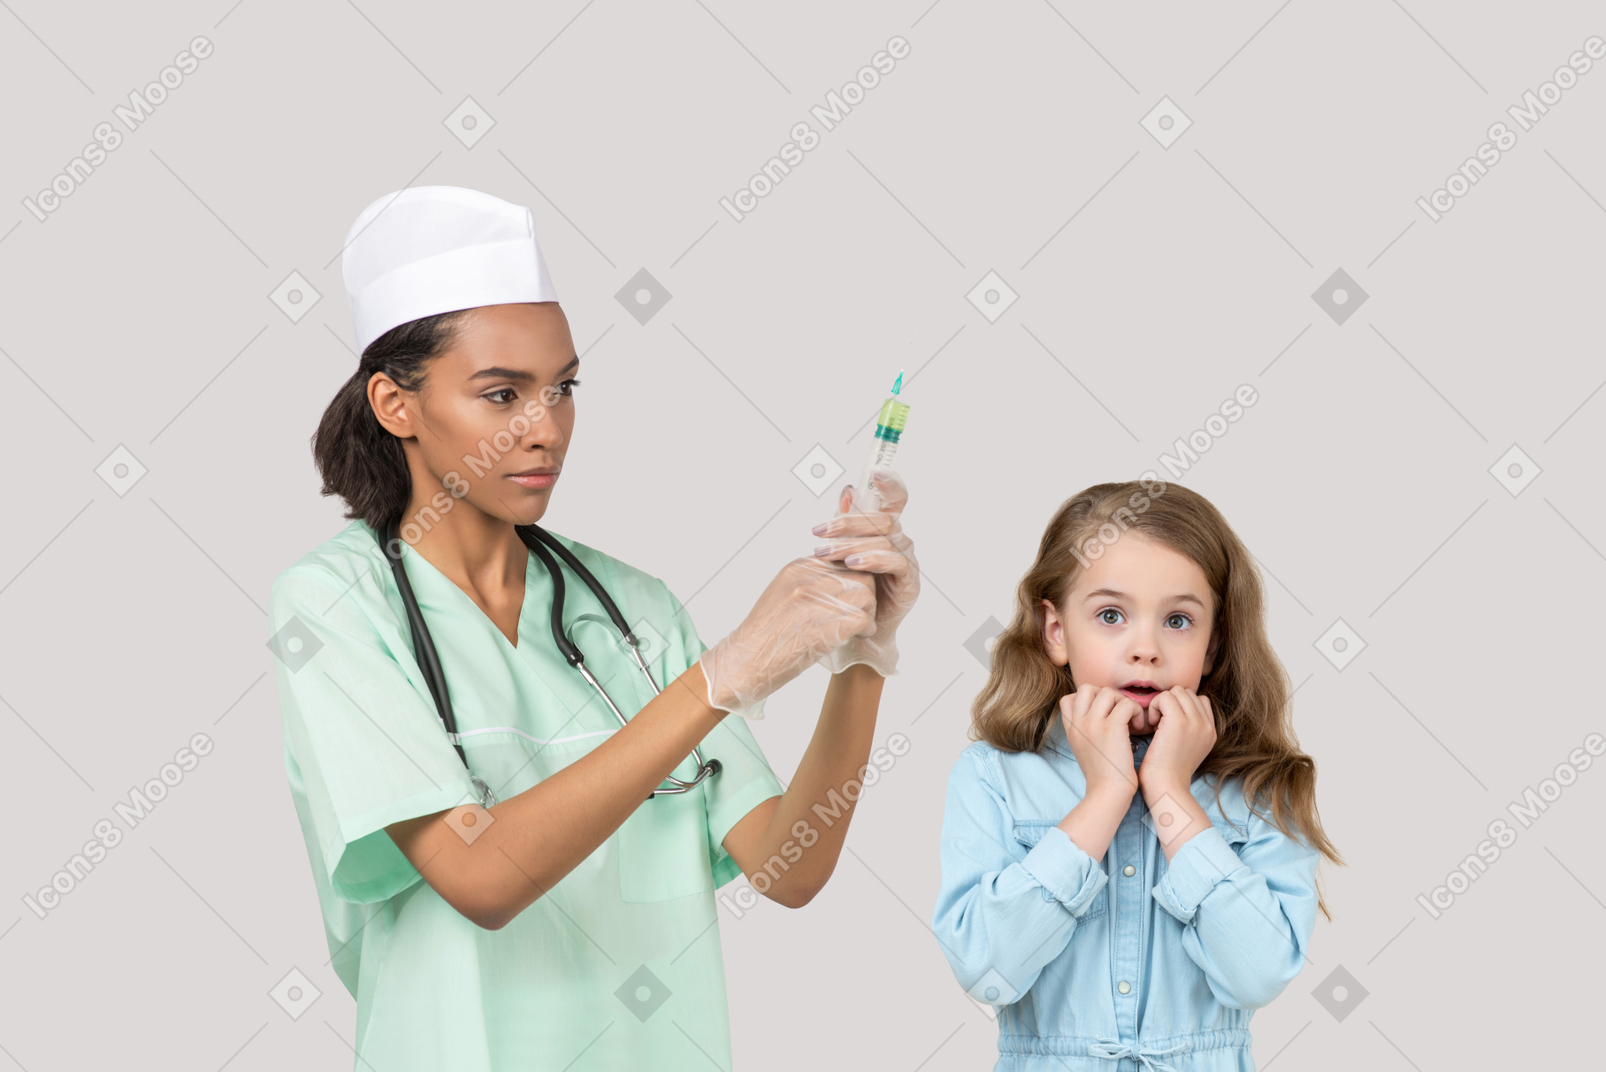 Don't worry, kiddo, it's just a typical vaccination